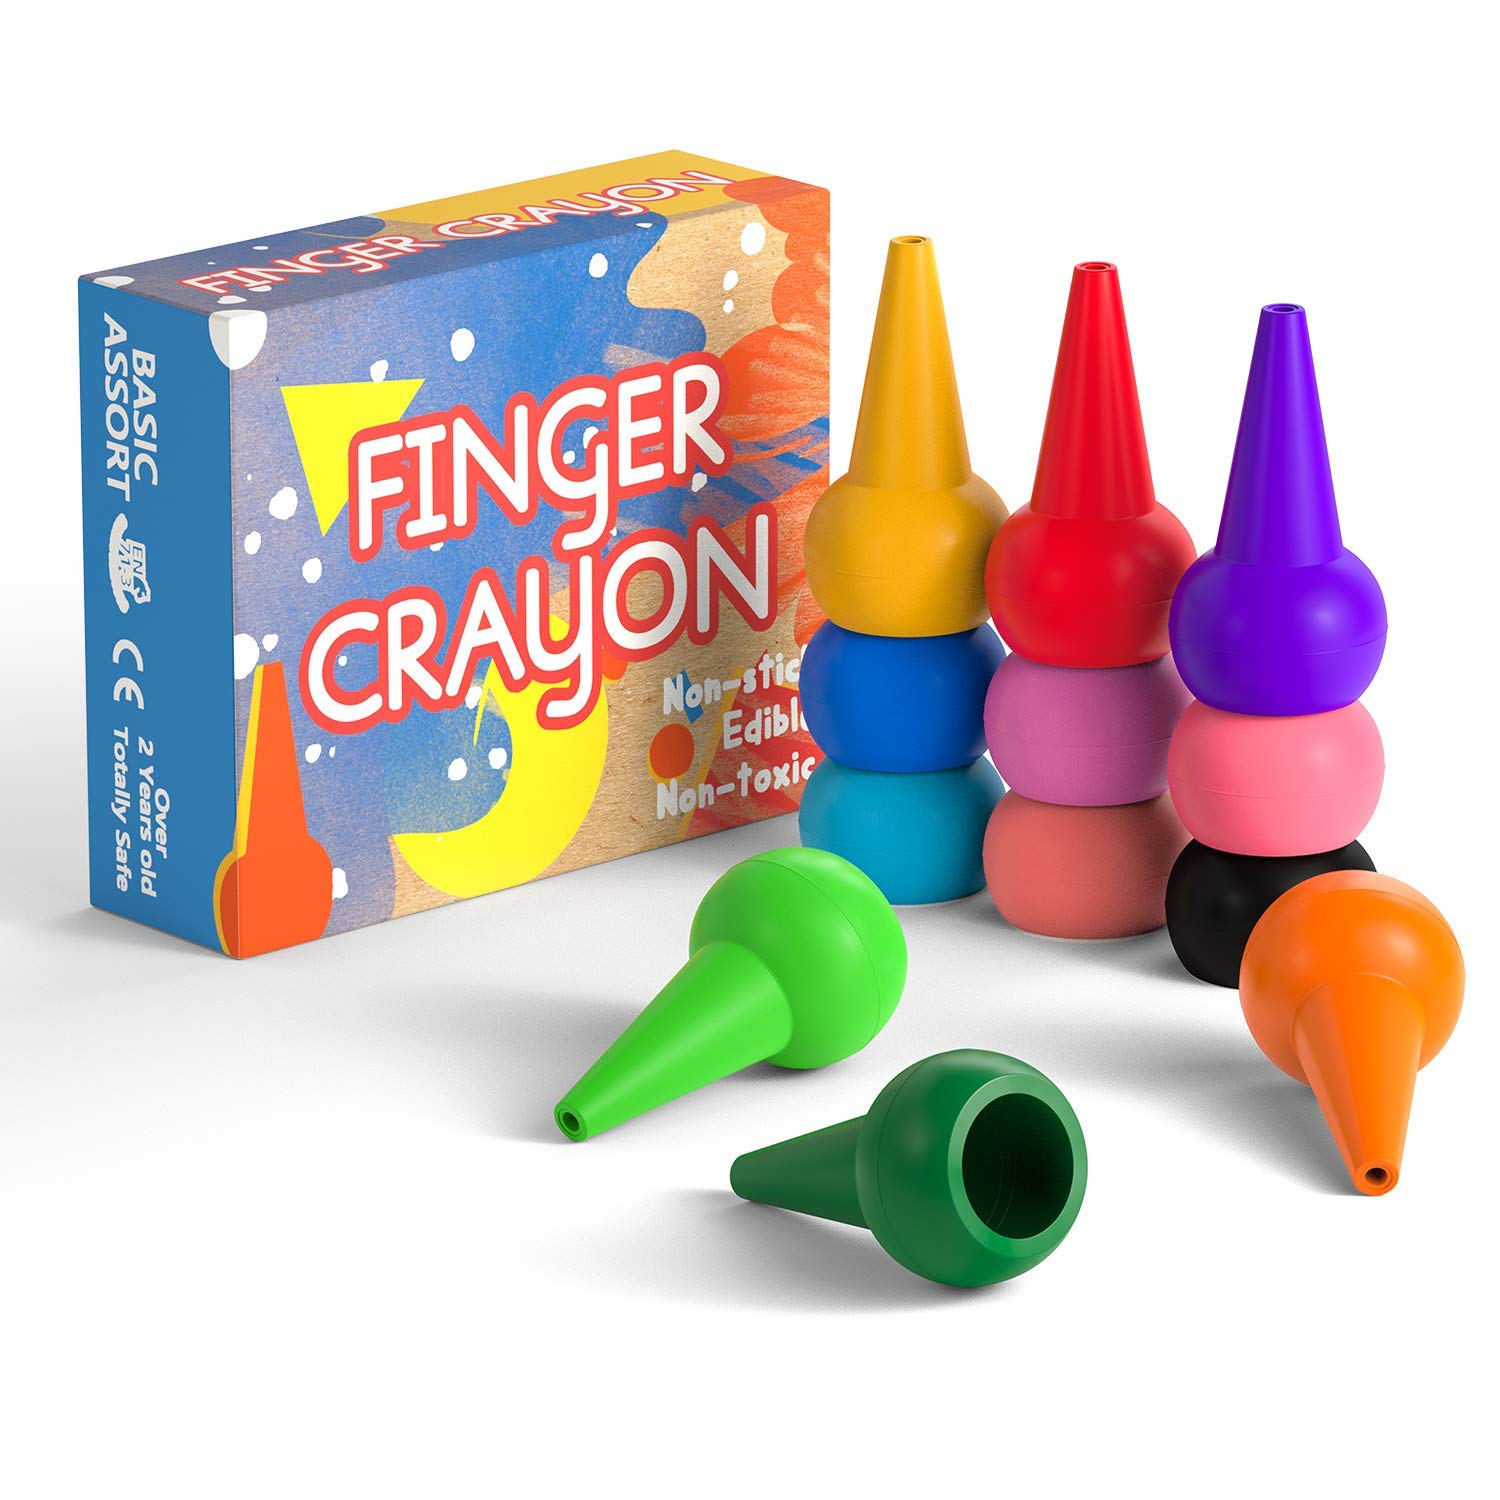 10 Best Crayons for Toddlers 2023 - Buying Guide & Reviews 5